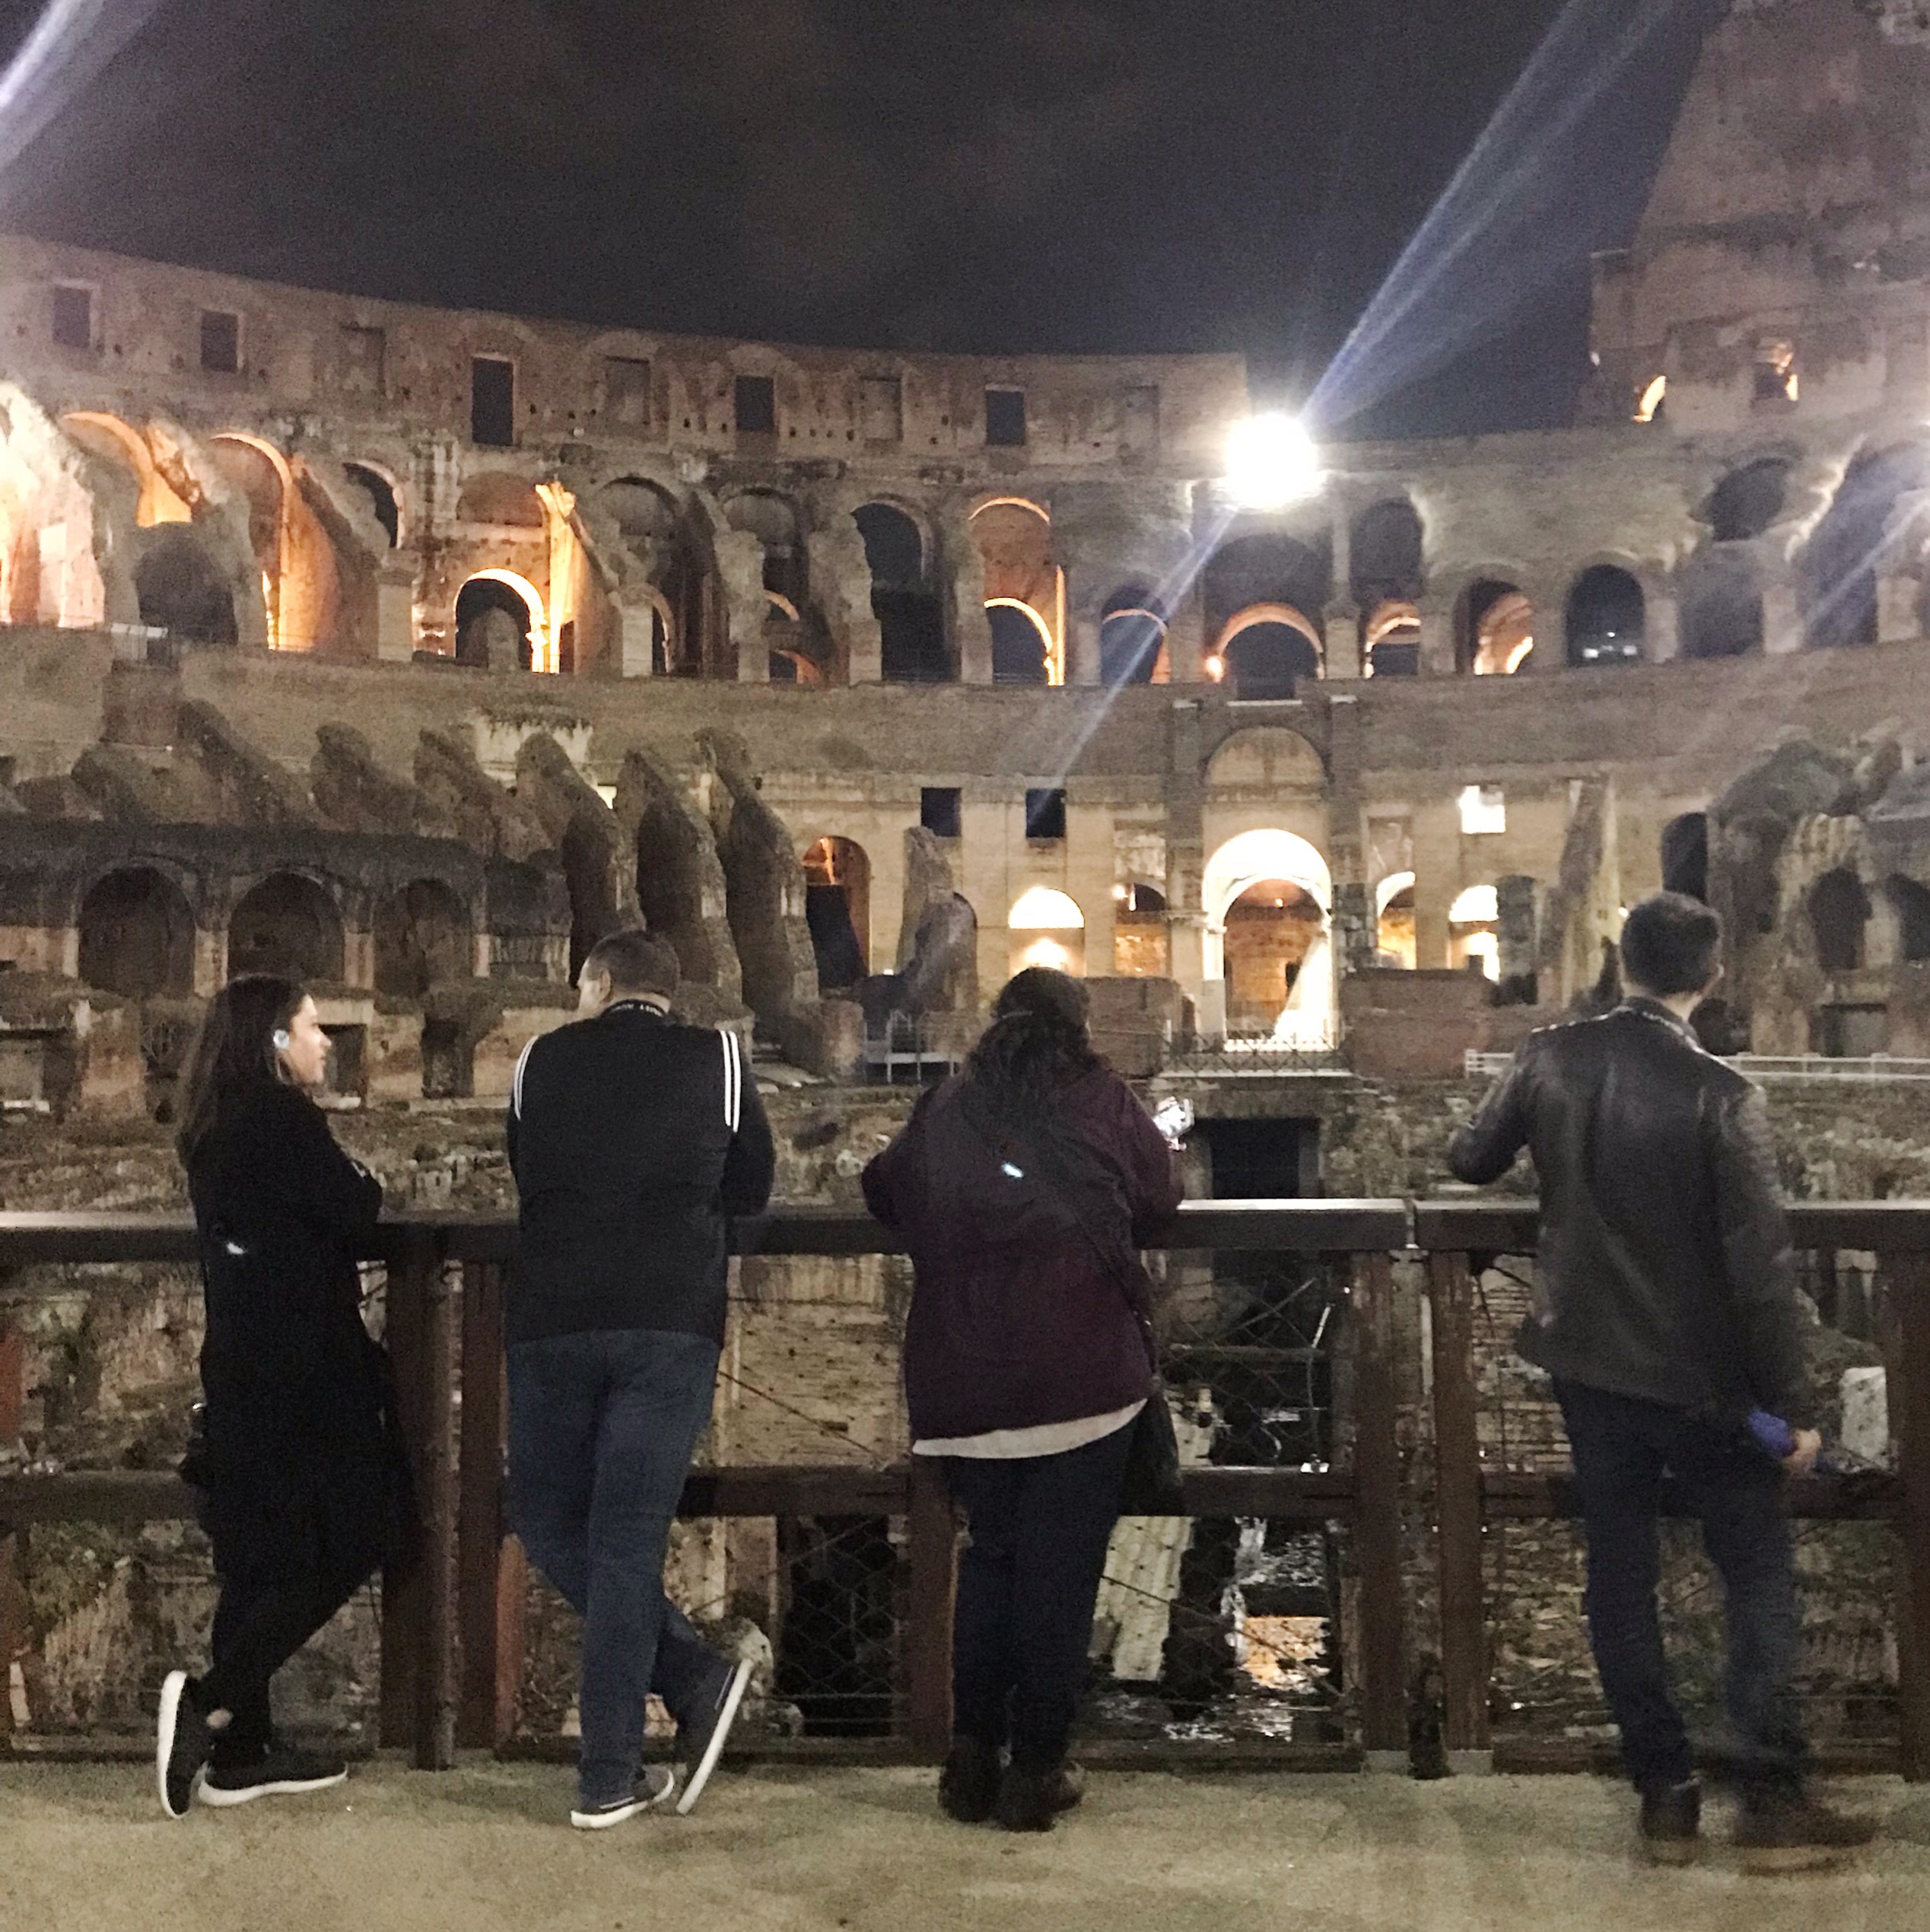 Nighttime Colosseum Tour with The Roman Guy